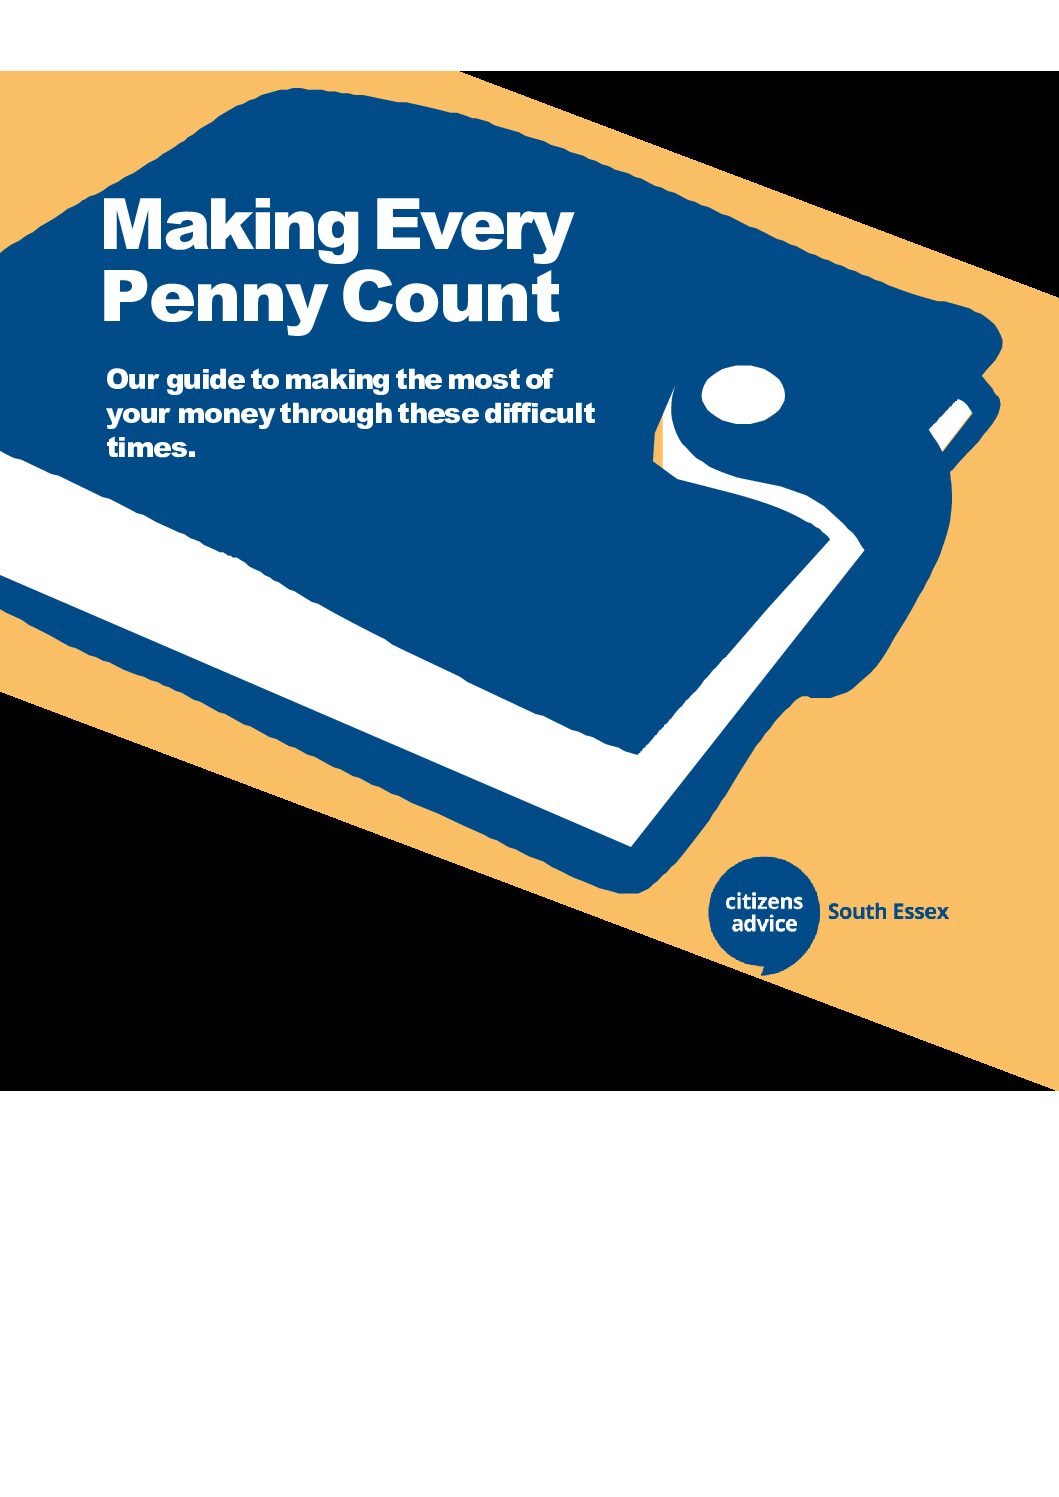 Making Every Penny Count Nov 22 FINAL 2 pdf